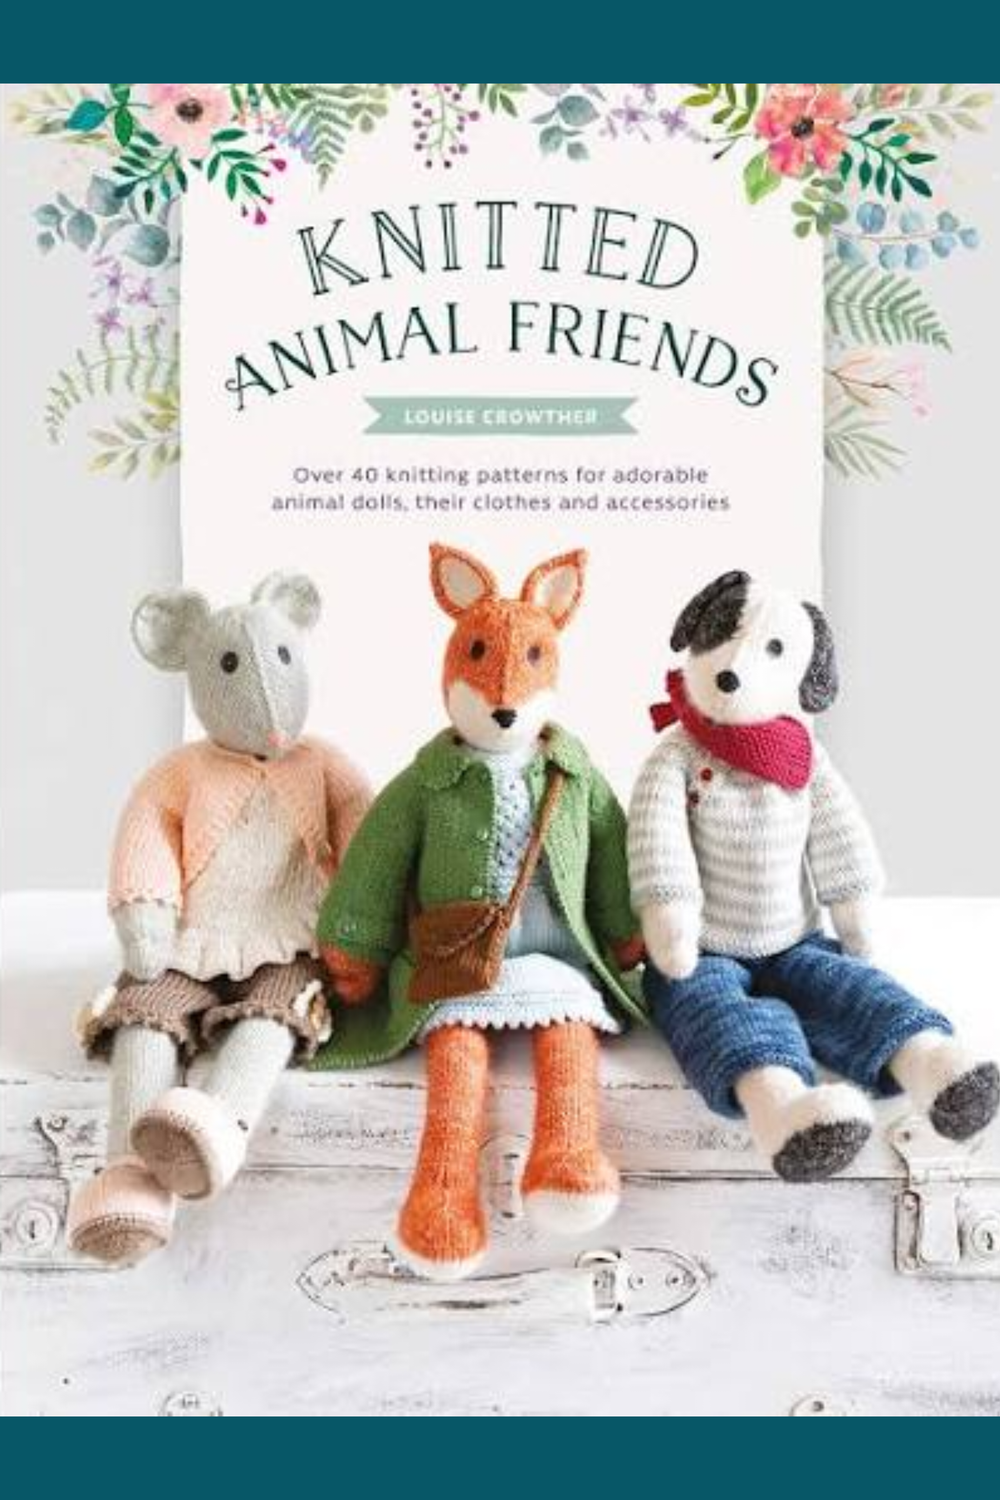 Knitted Animal Friends — Granny Bird's Wool Shoppe